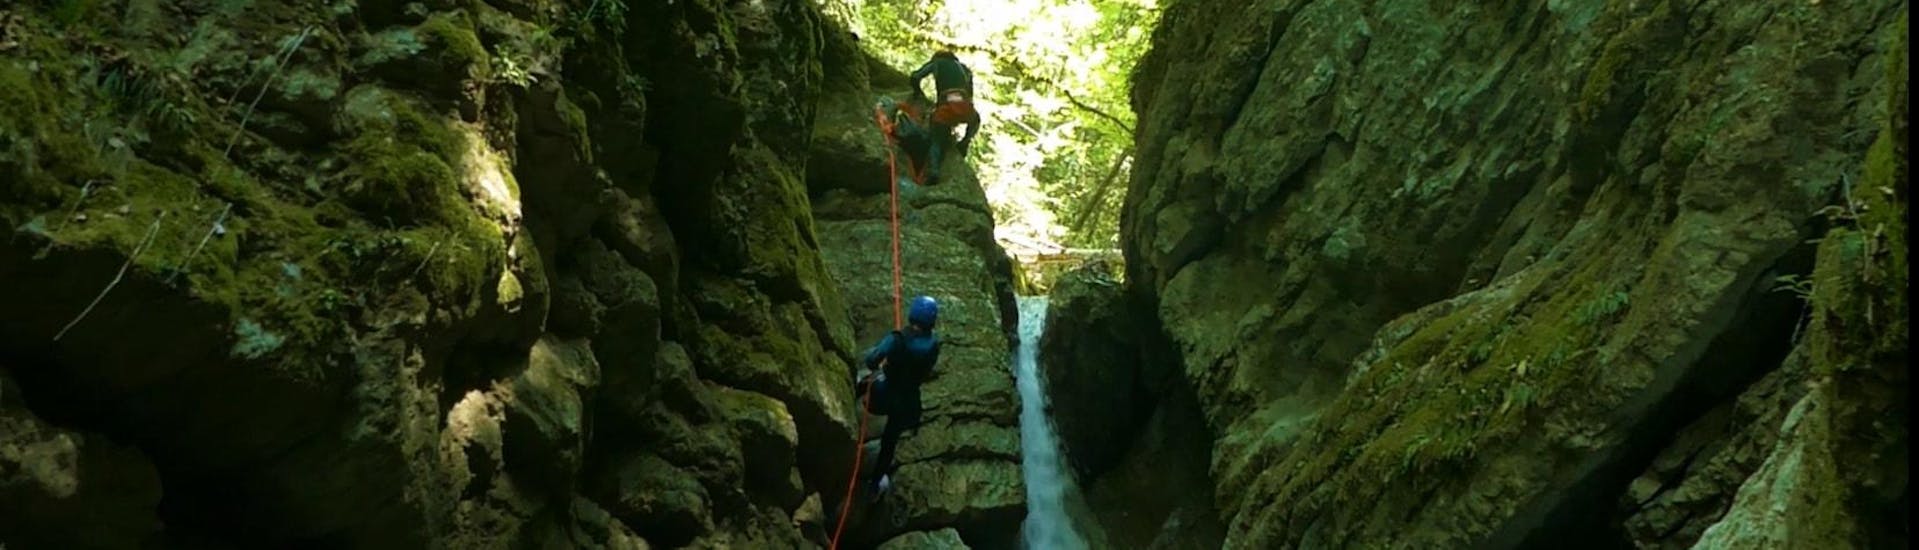 Canyoning nel canyon d'Angon a Talloires, vicino Annecy - Mailbox.